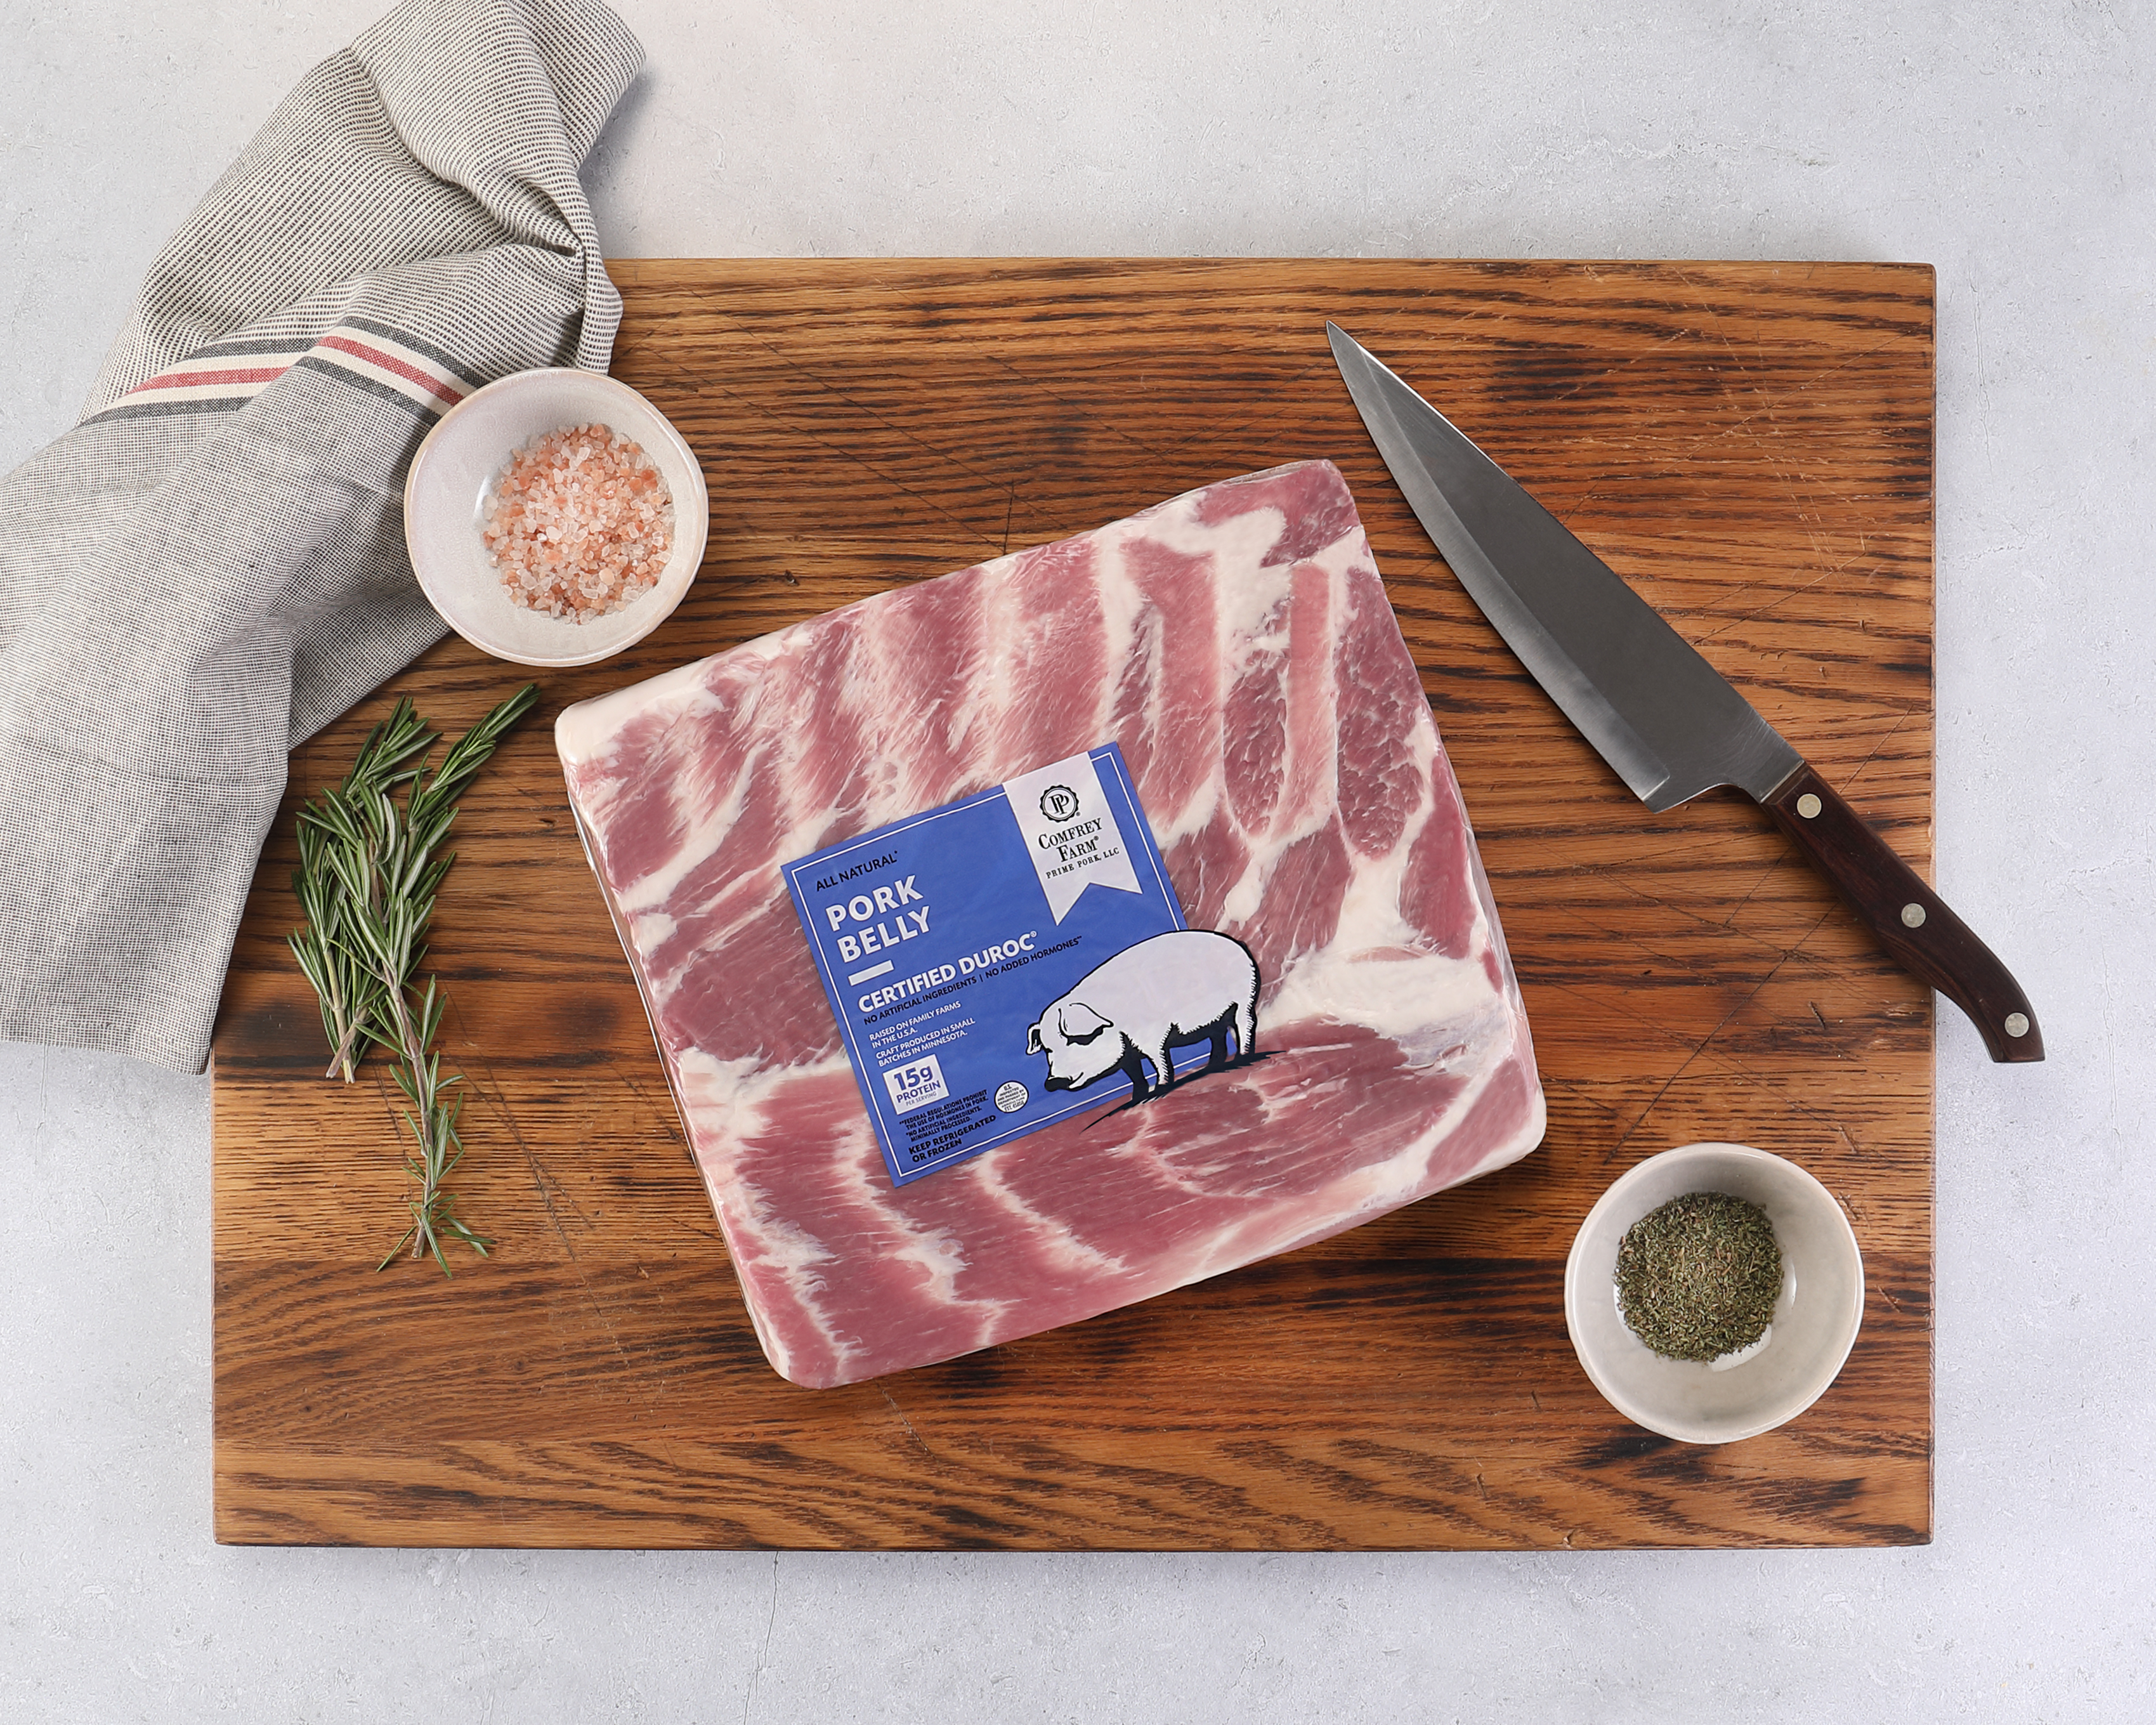 Comfrey Farm Certified DUROC Pork Belly is the go-to cut to make crispy homemade bacon, a sizzling hot trend taking over kitchens across America. Or, smoke it for a treat that's crispy on the outside and melts in your mouth on the first savory bite.
